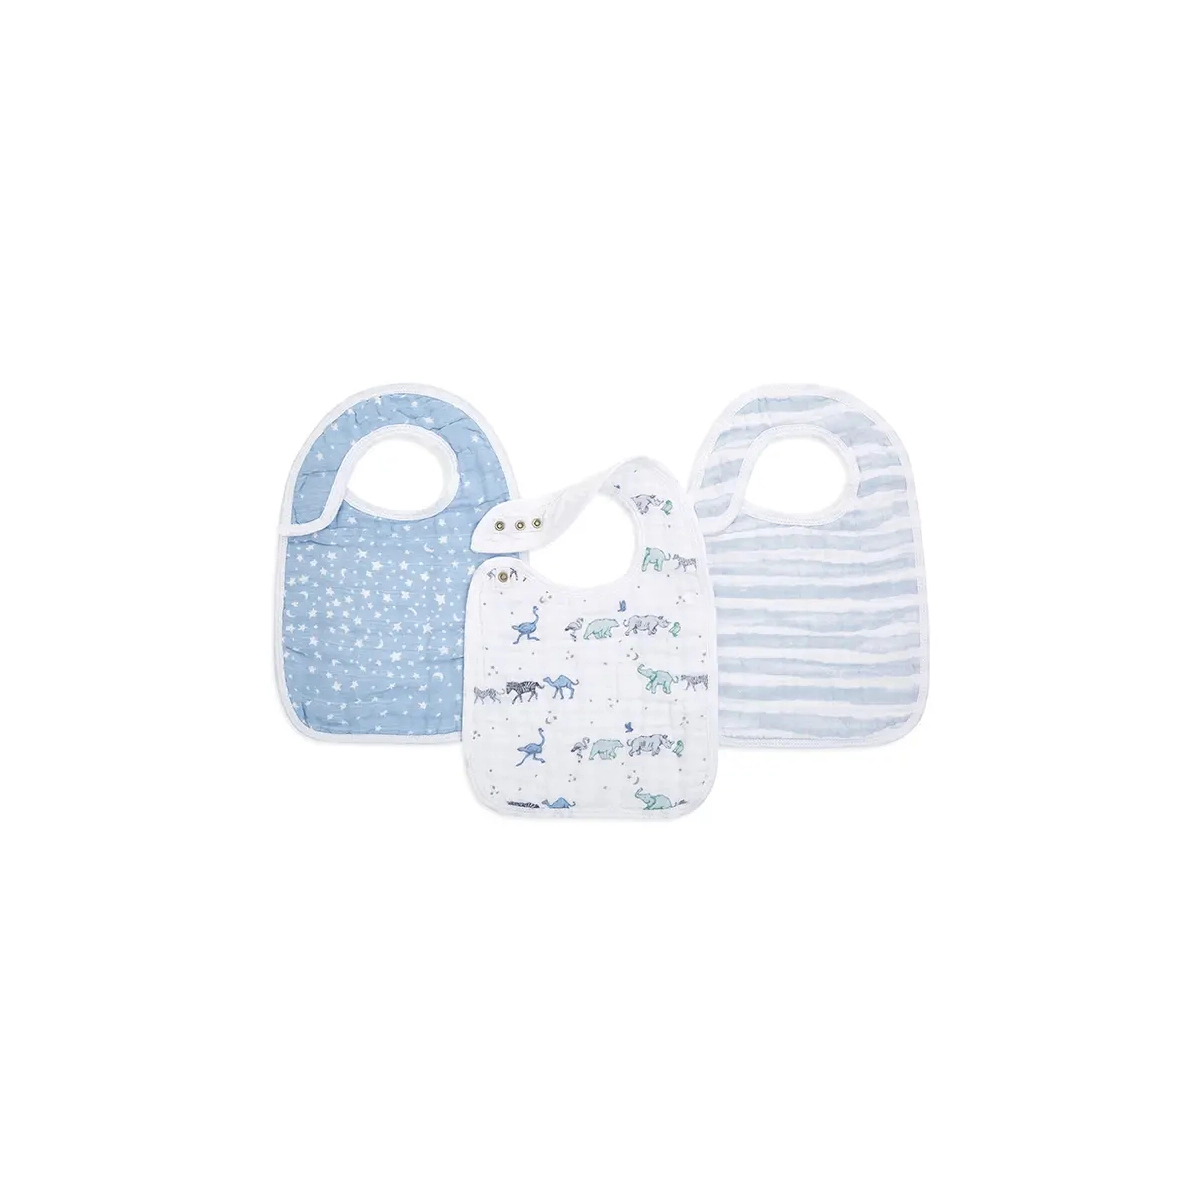 Image of Aden + Anais Pack of 3 Snap Bibs Cotton Muslin - Rising Star (23-19-115)